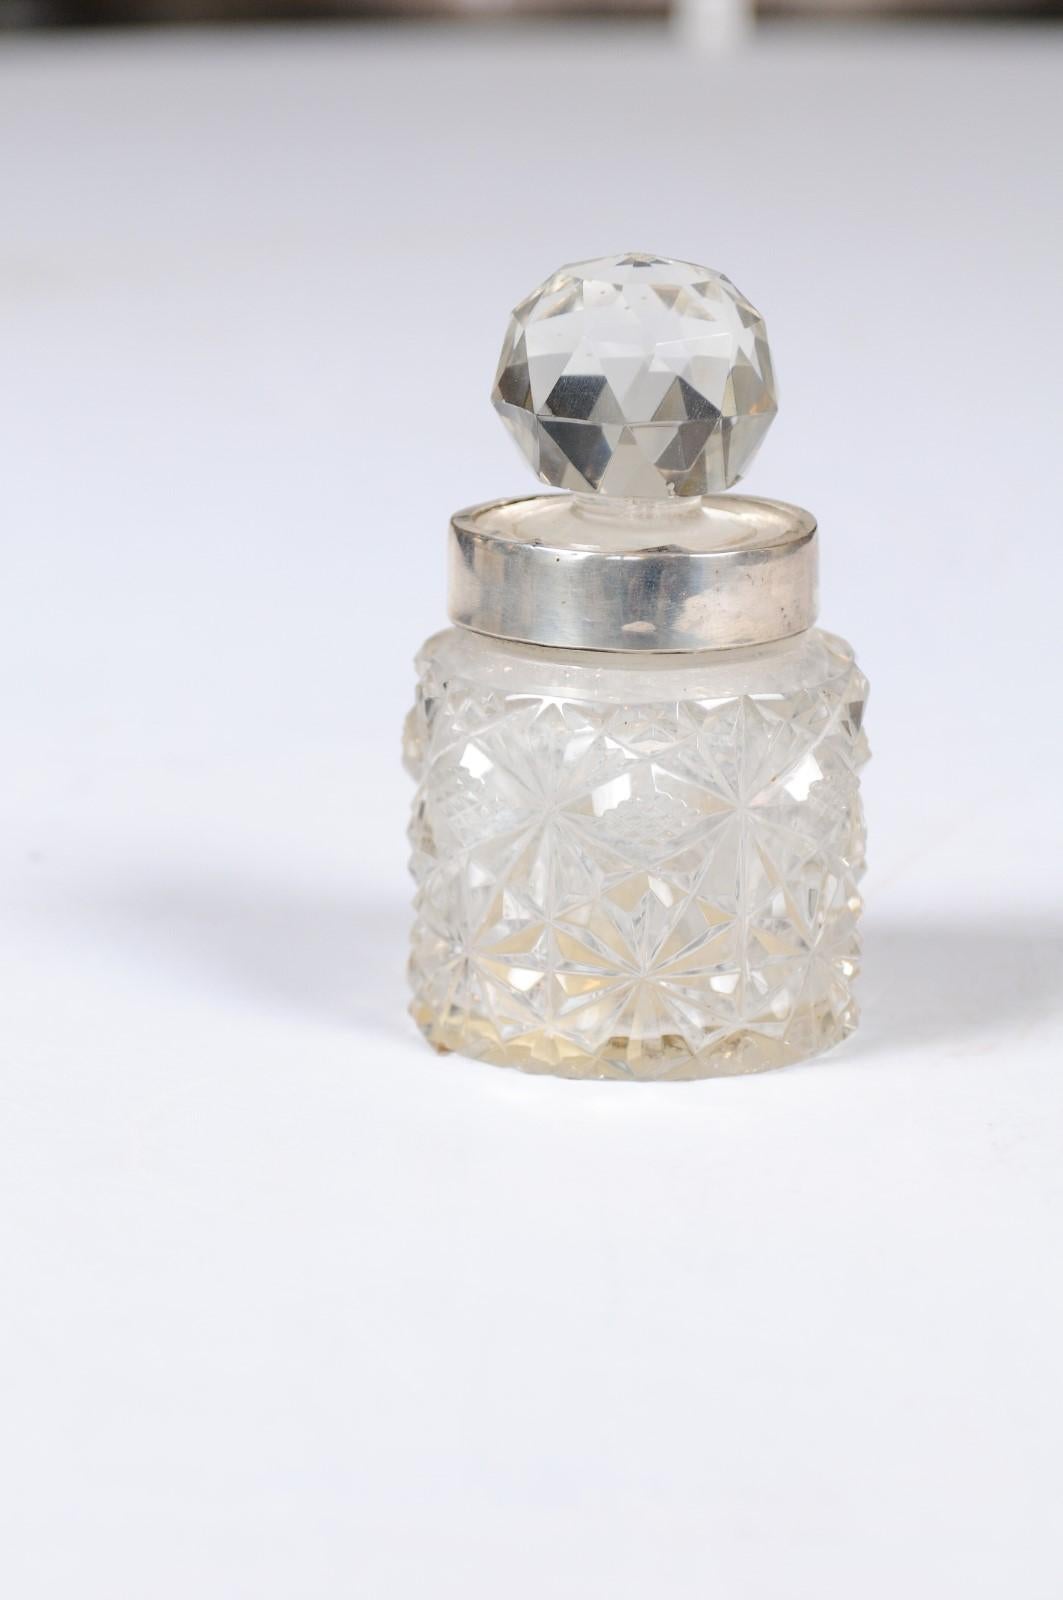 A small English crystal jug from the 19th century, with silver neck and round faceted stopper. Born in England during the 19th century, this lovely petite jug features a circular body adorned with diamond-shaped motifs, while a silver neck supports